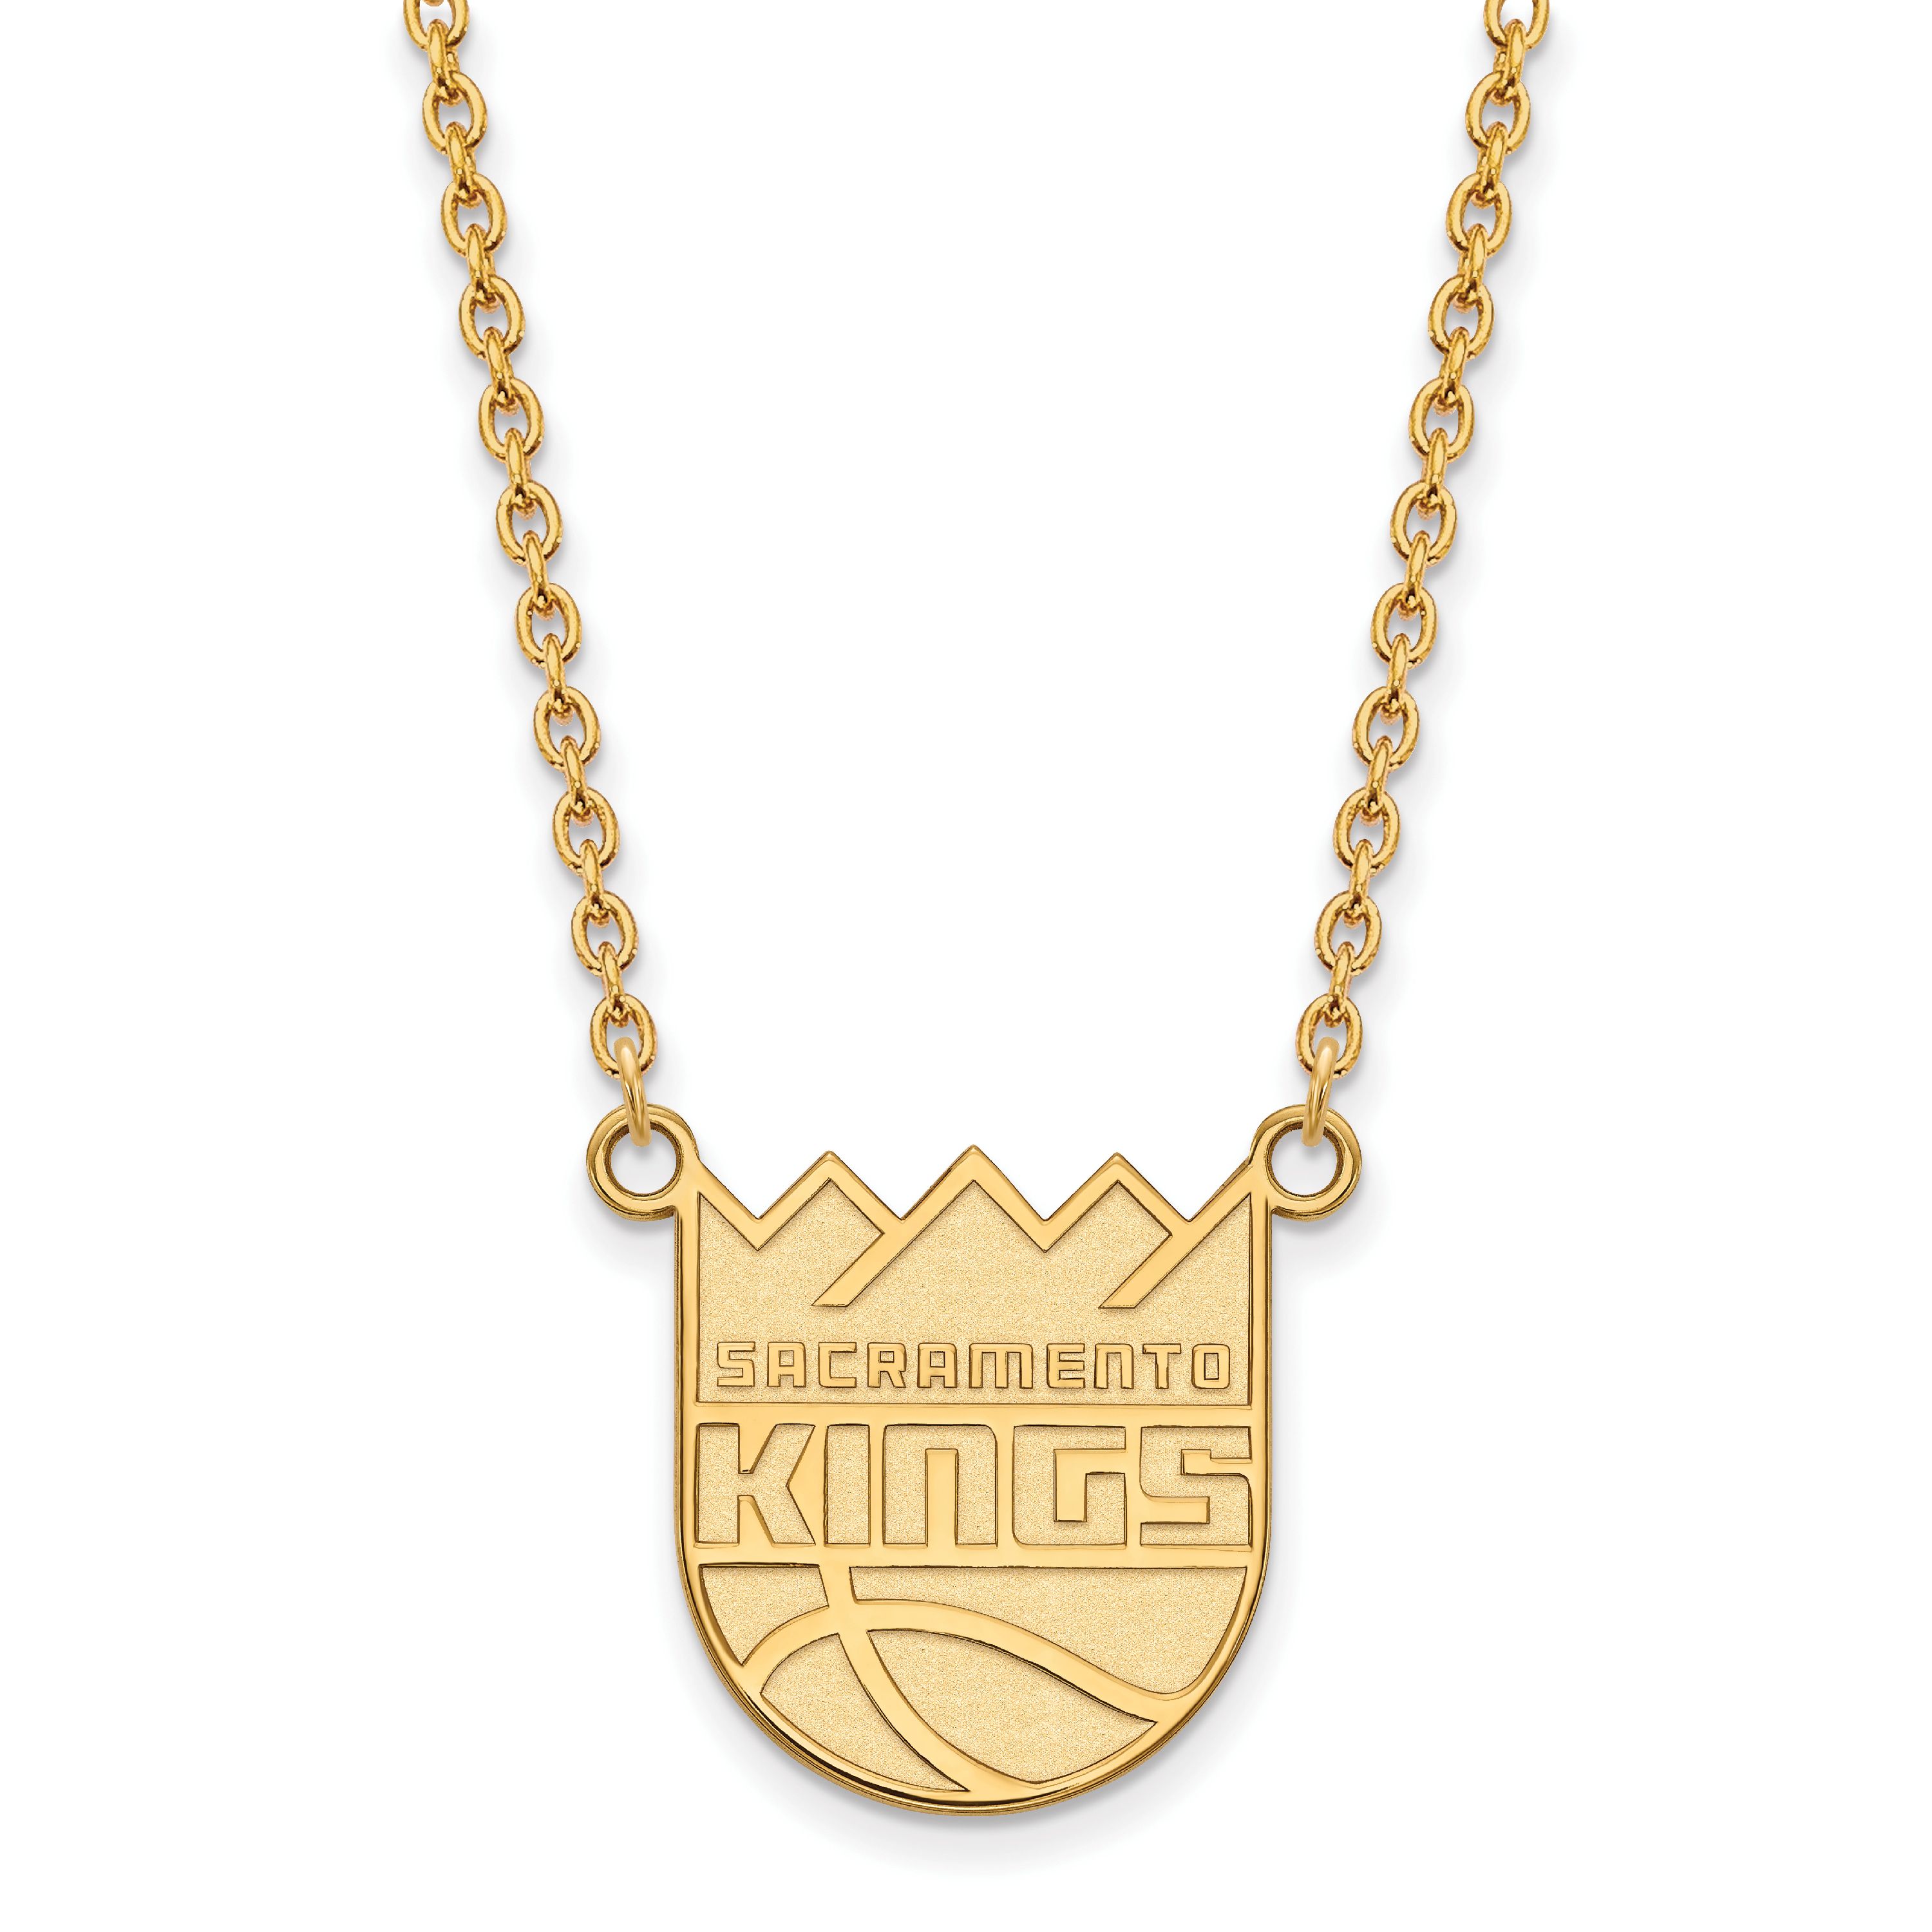 NBA Sacramento Kings 10kt Yellow Gold Large Pendant with Necklace - image 1 of 5